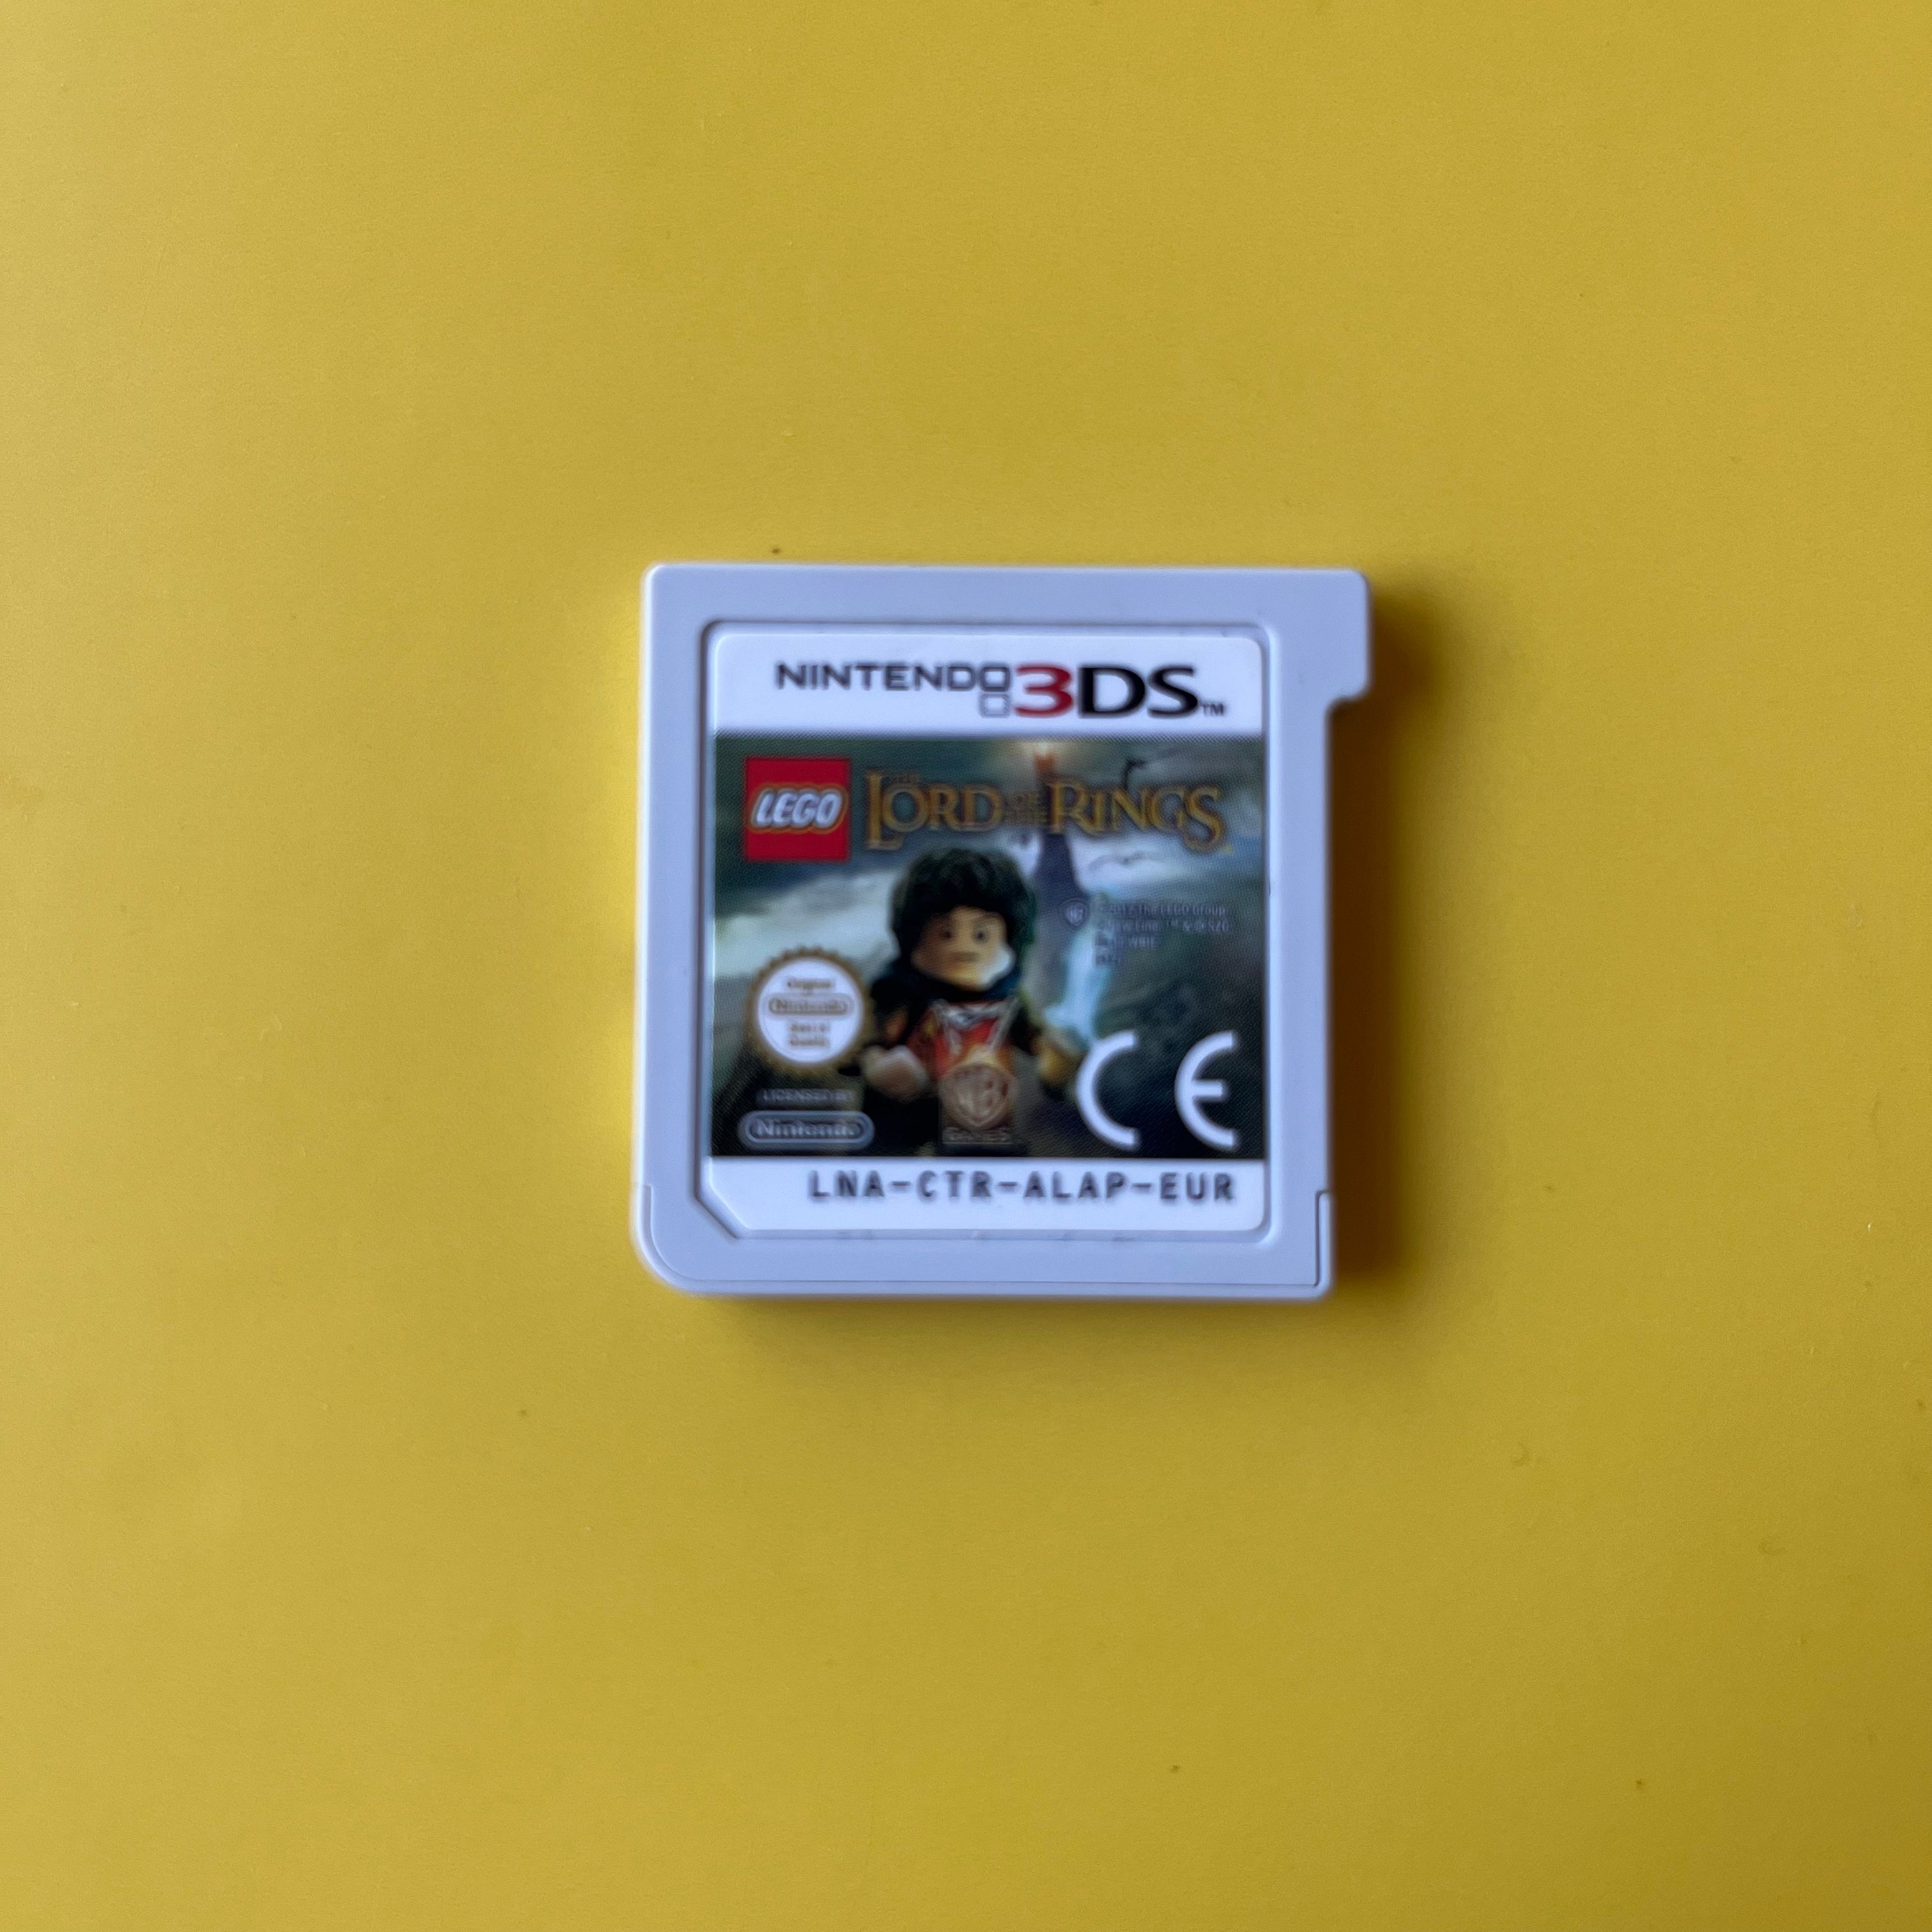 3DS - LEGO - Lord of the Rings